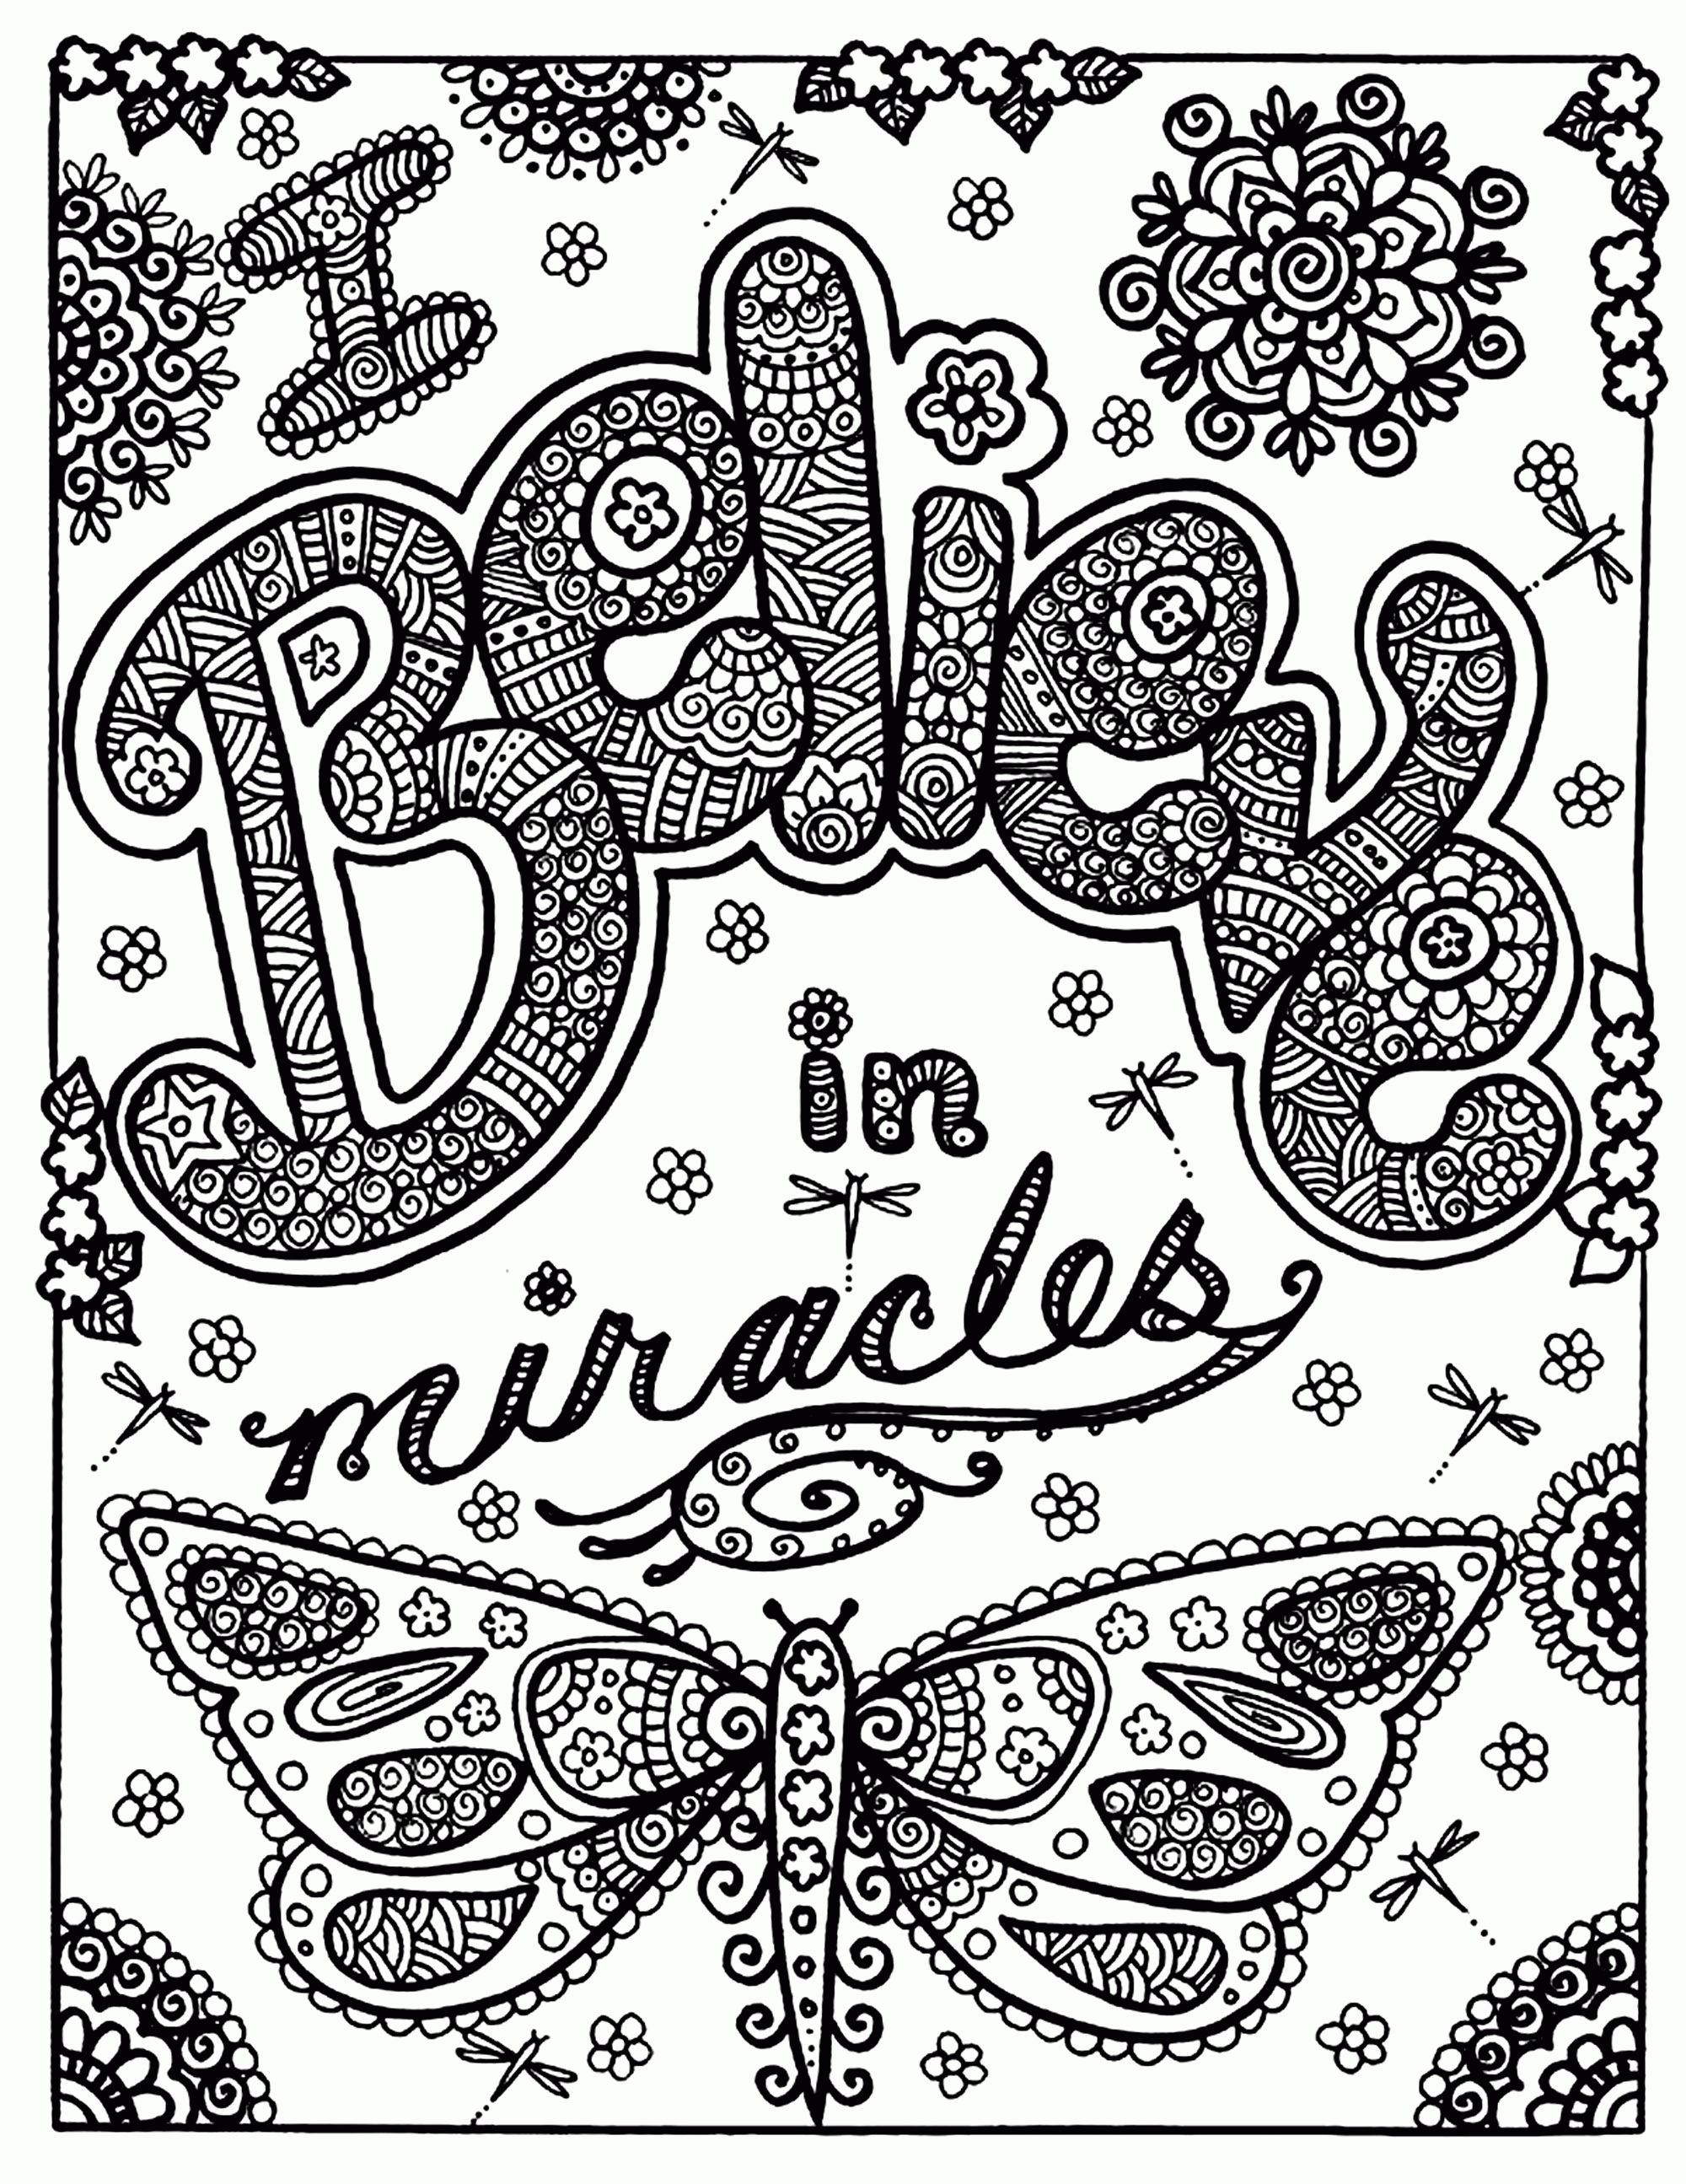 Insect - Coloring Pages for adults : coloring-adult-butterfly-miracle